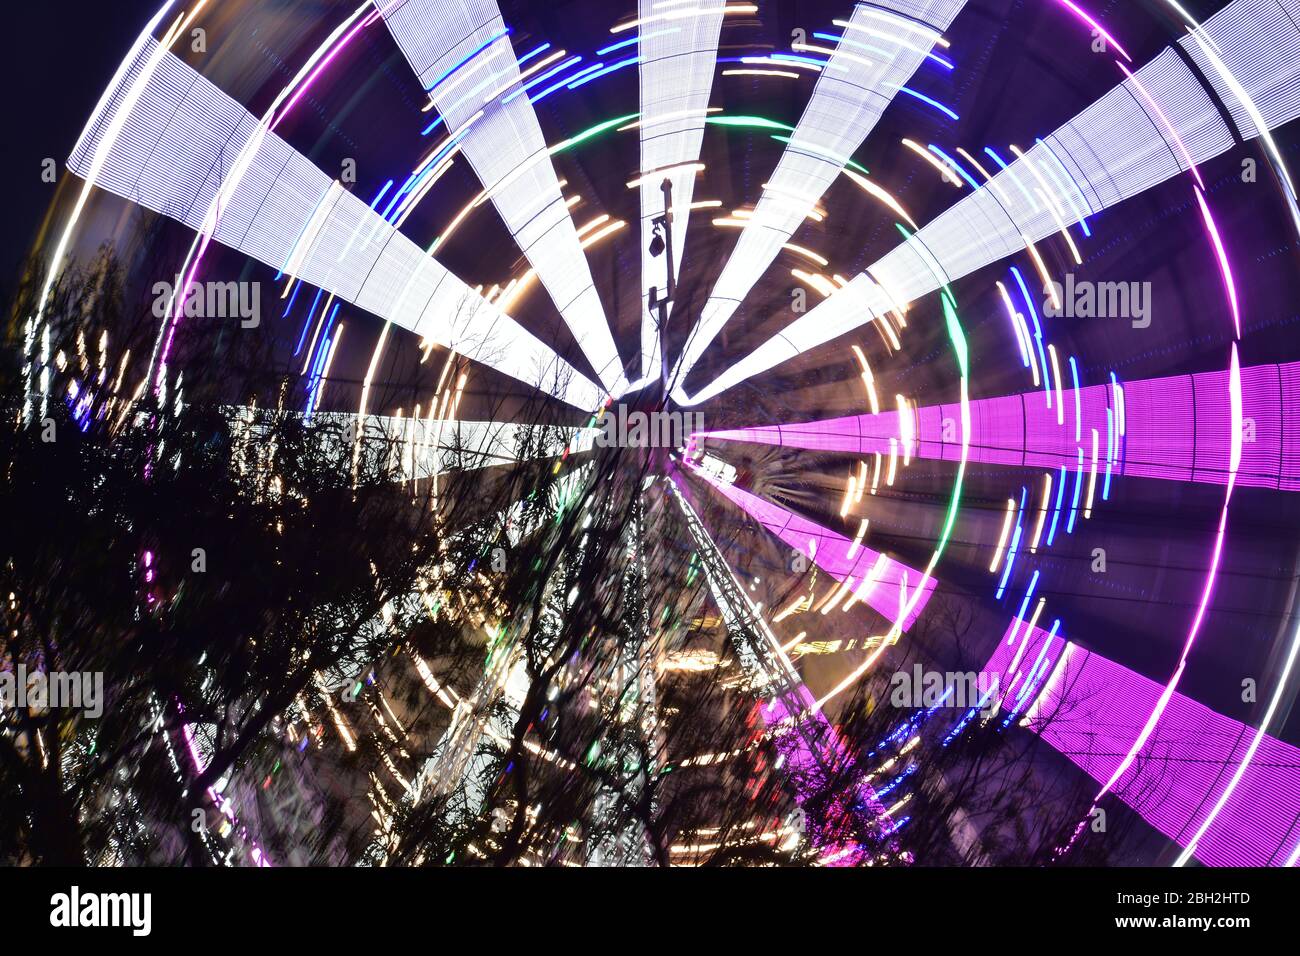 A nighttime view of the Ferris wheel in India with slow sutters speed Stock Photo